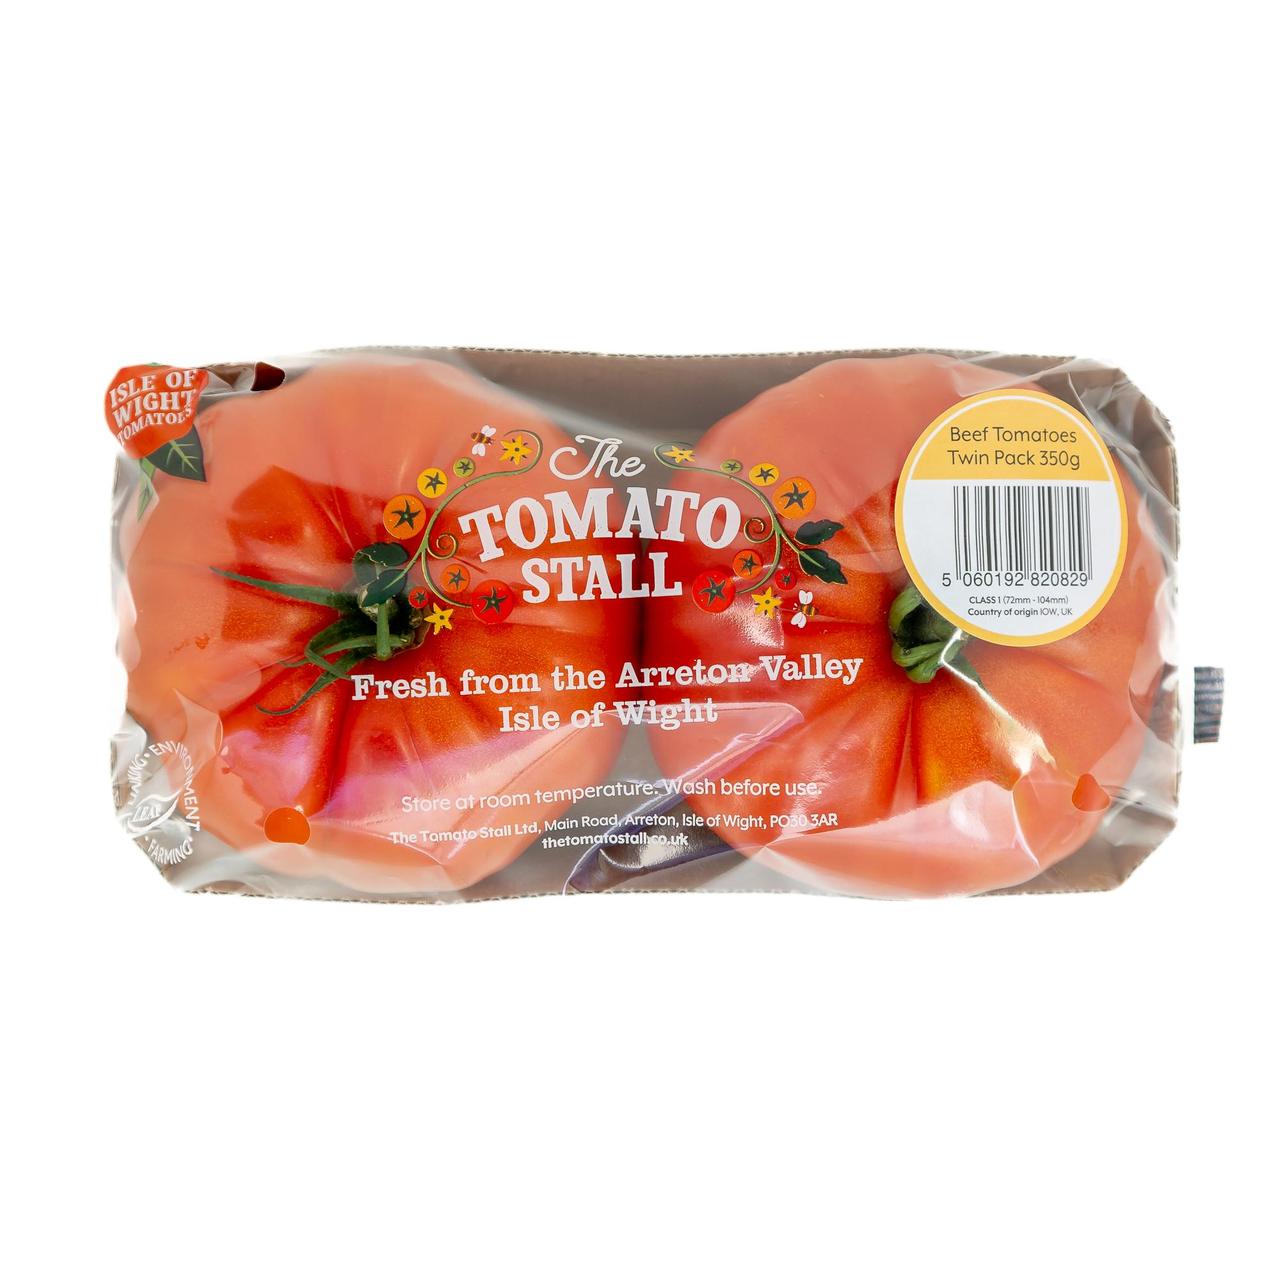 Isle of Wight Beef Tomatoes Twinpack